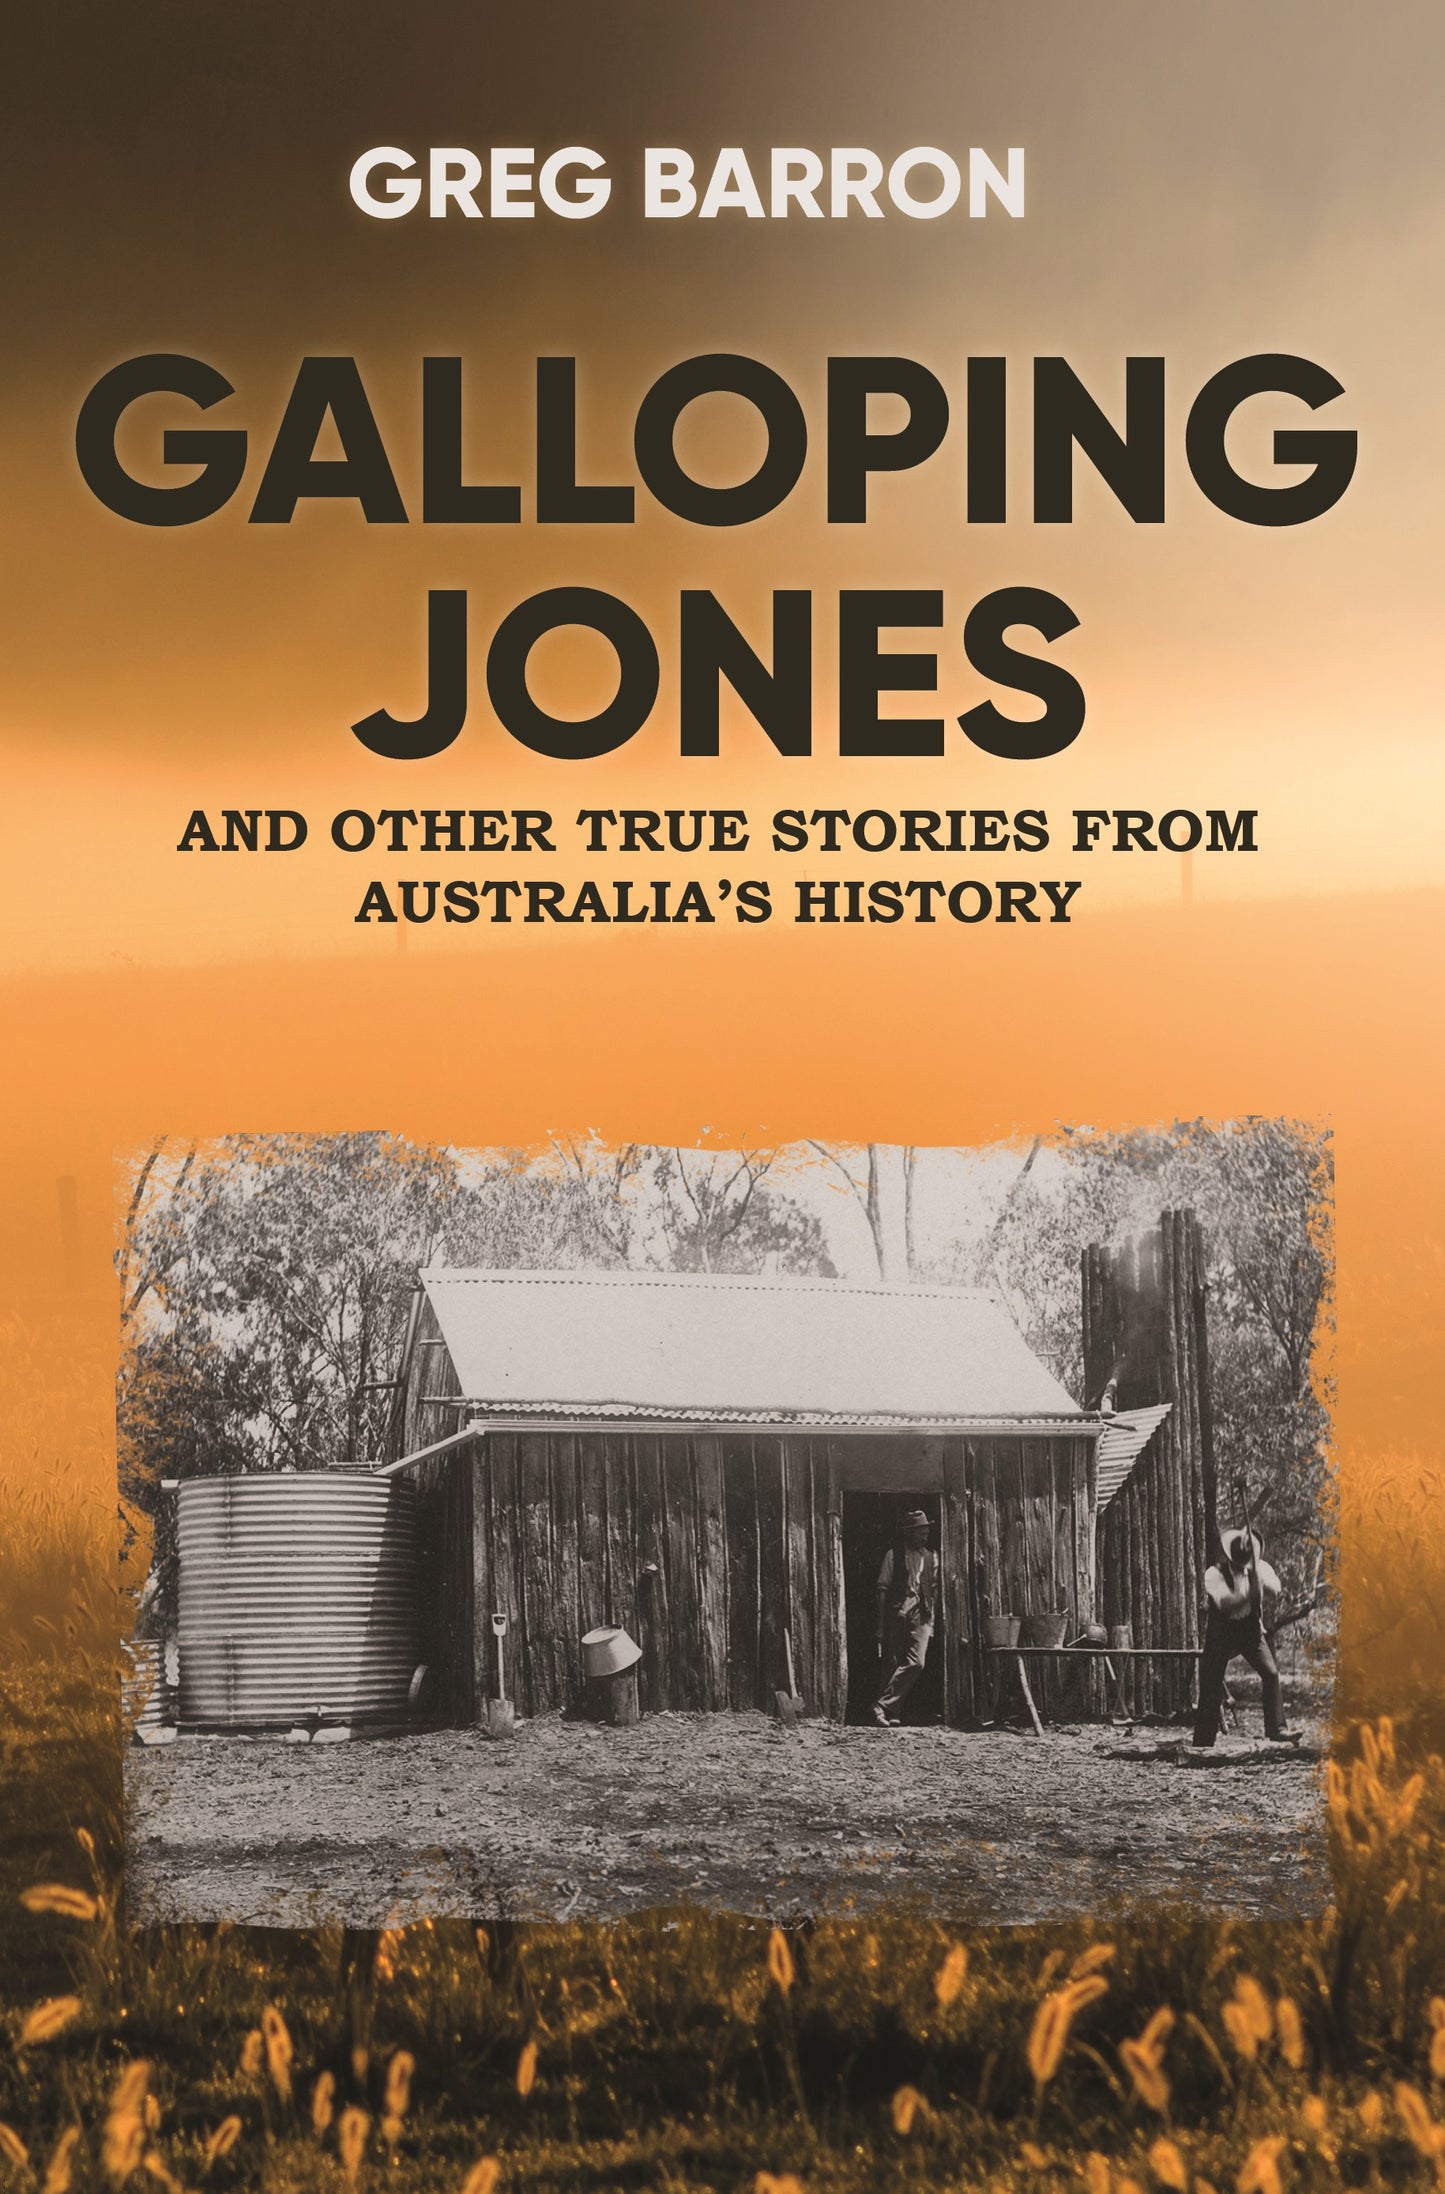 Galloping Jones and Other True Stories from Australia's History